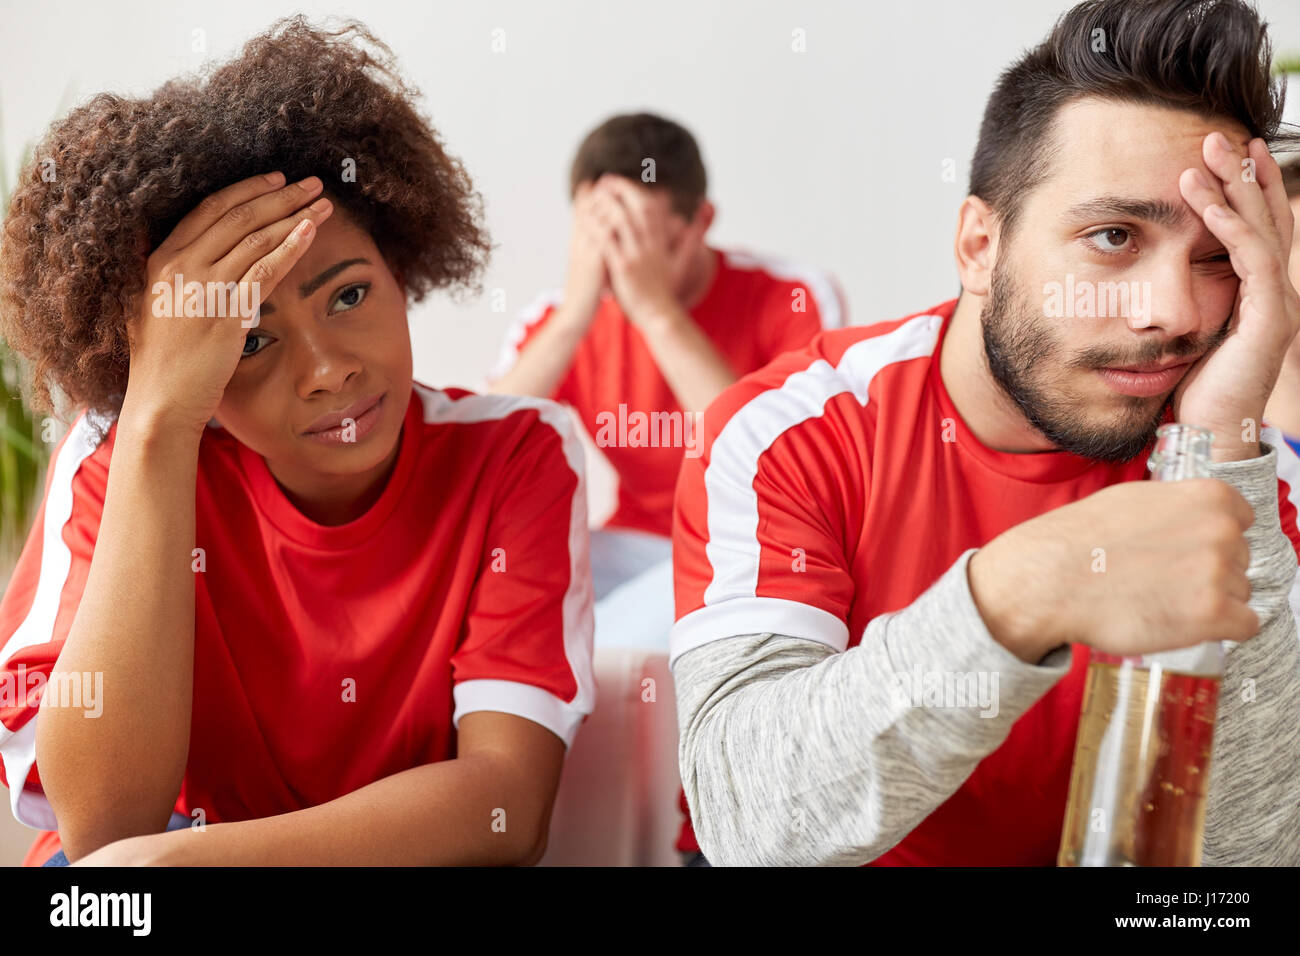 sad friends or football fans at home Stock Photo